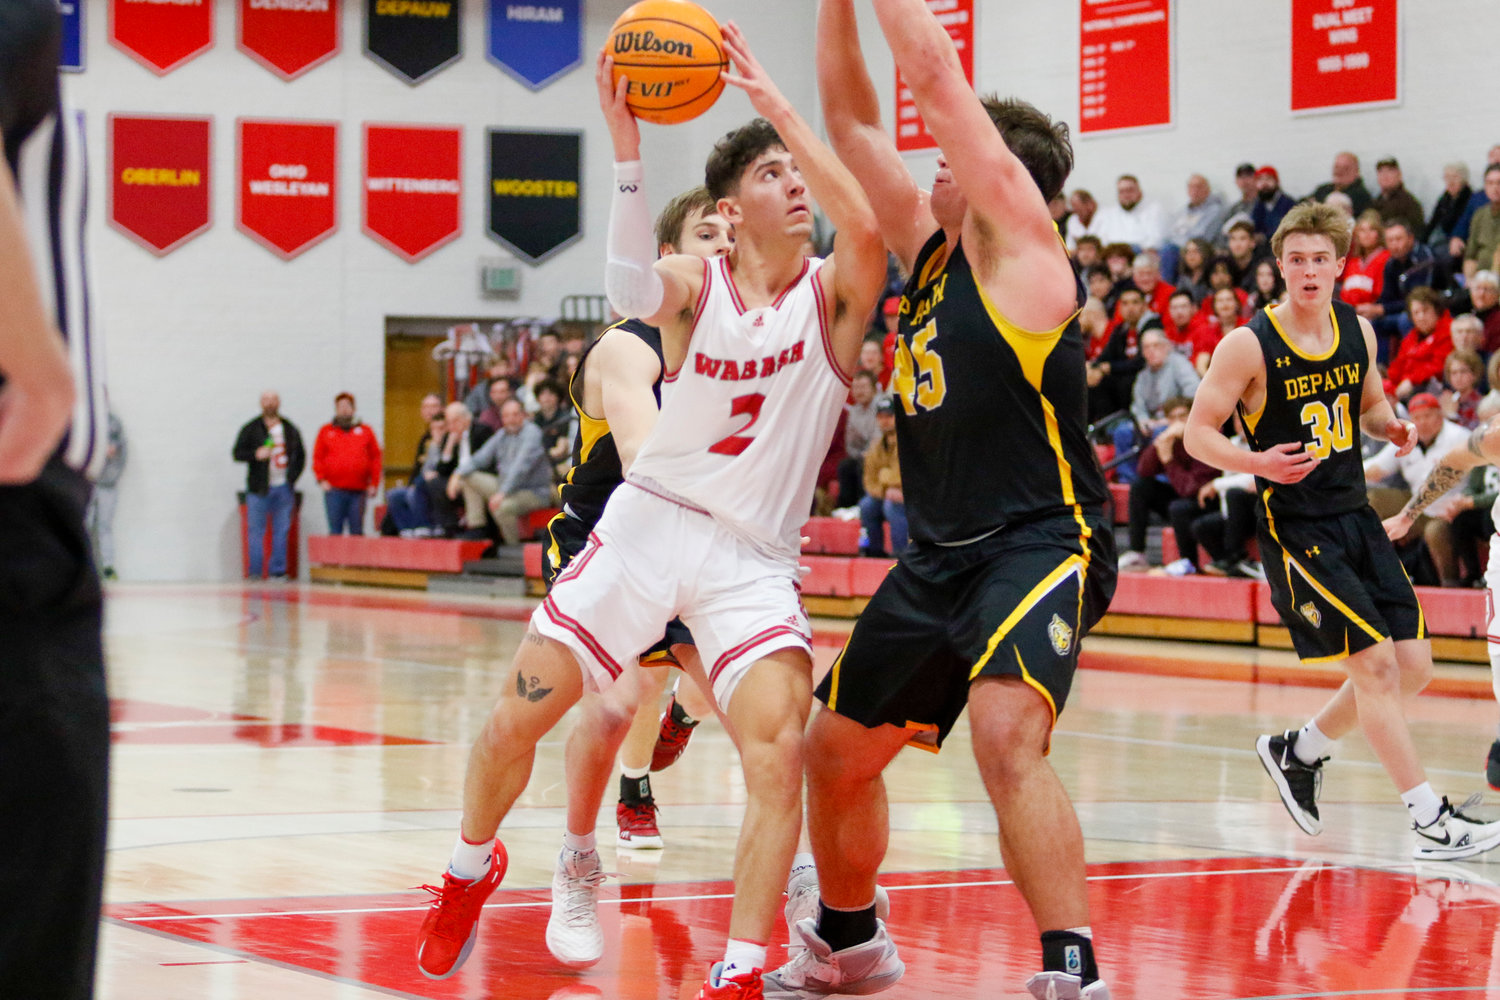 Sophomore Vinny Buccilla tied his career high with 25 points to help lead Wabash to an 89-79 win over their rival DePauw on Wednesday night in front of electric crowd at Chadwick Court.